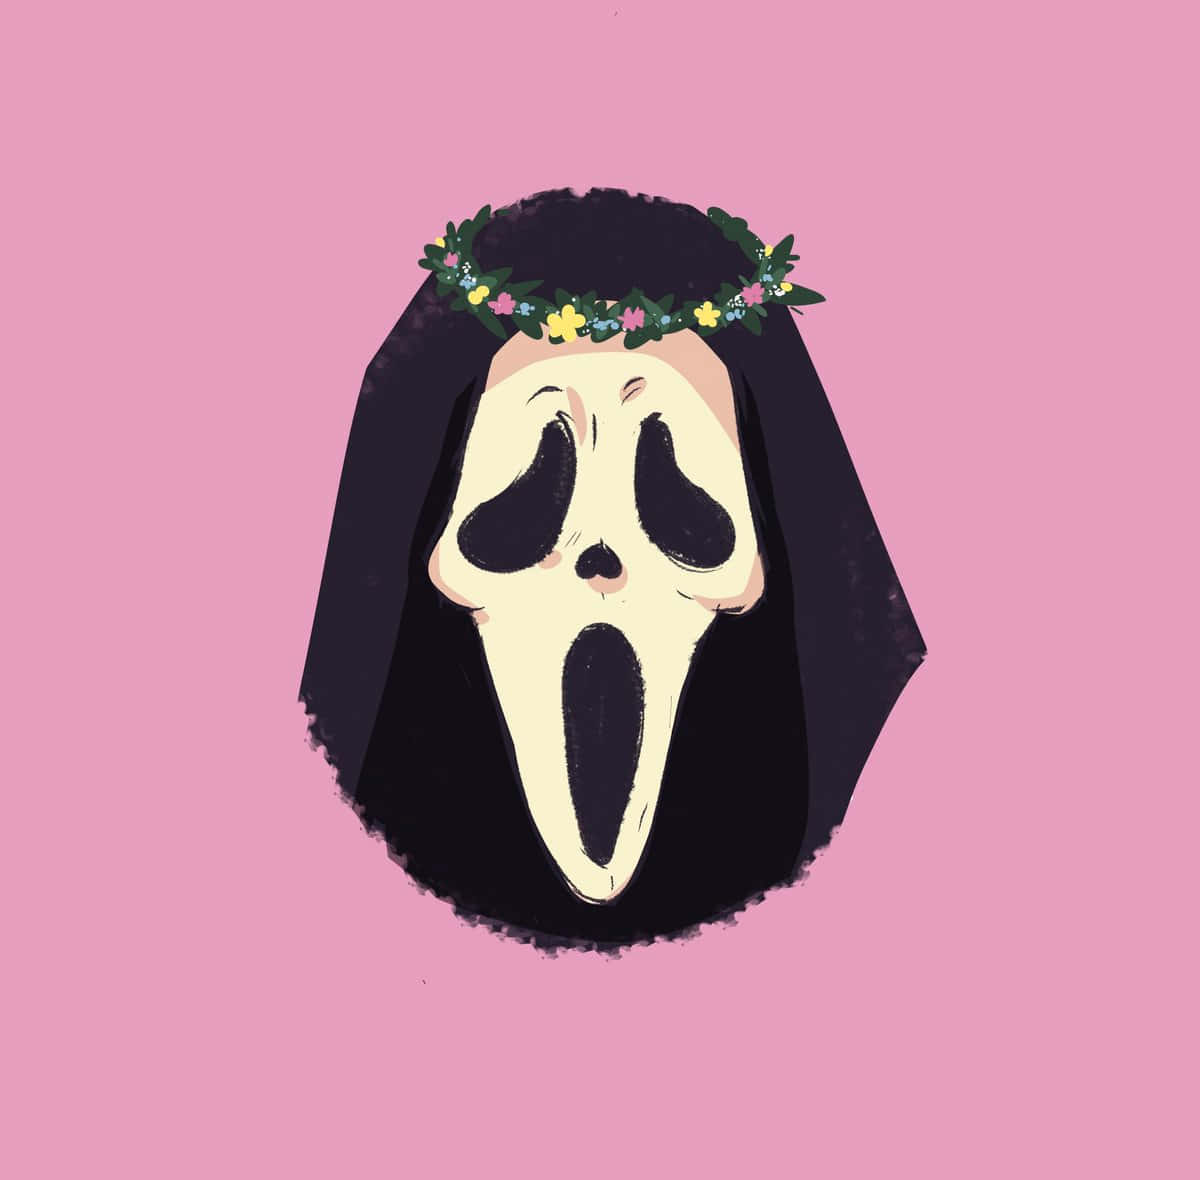 Cute Ghostface With Flower Crown Wallpaper